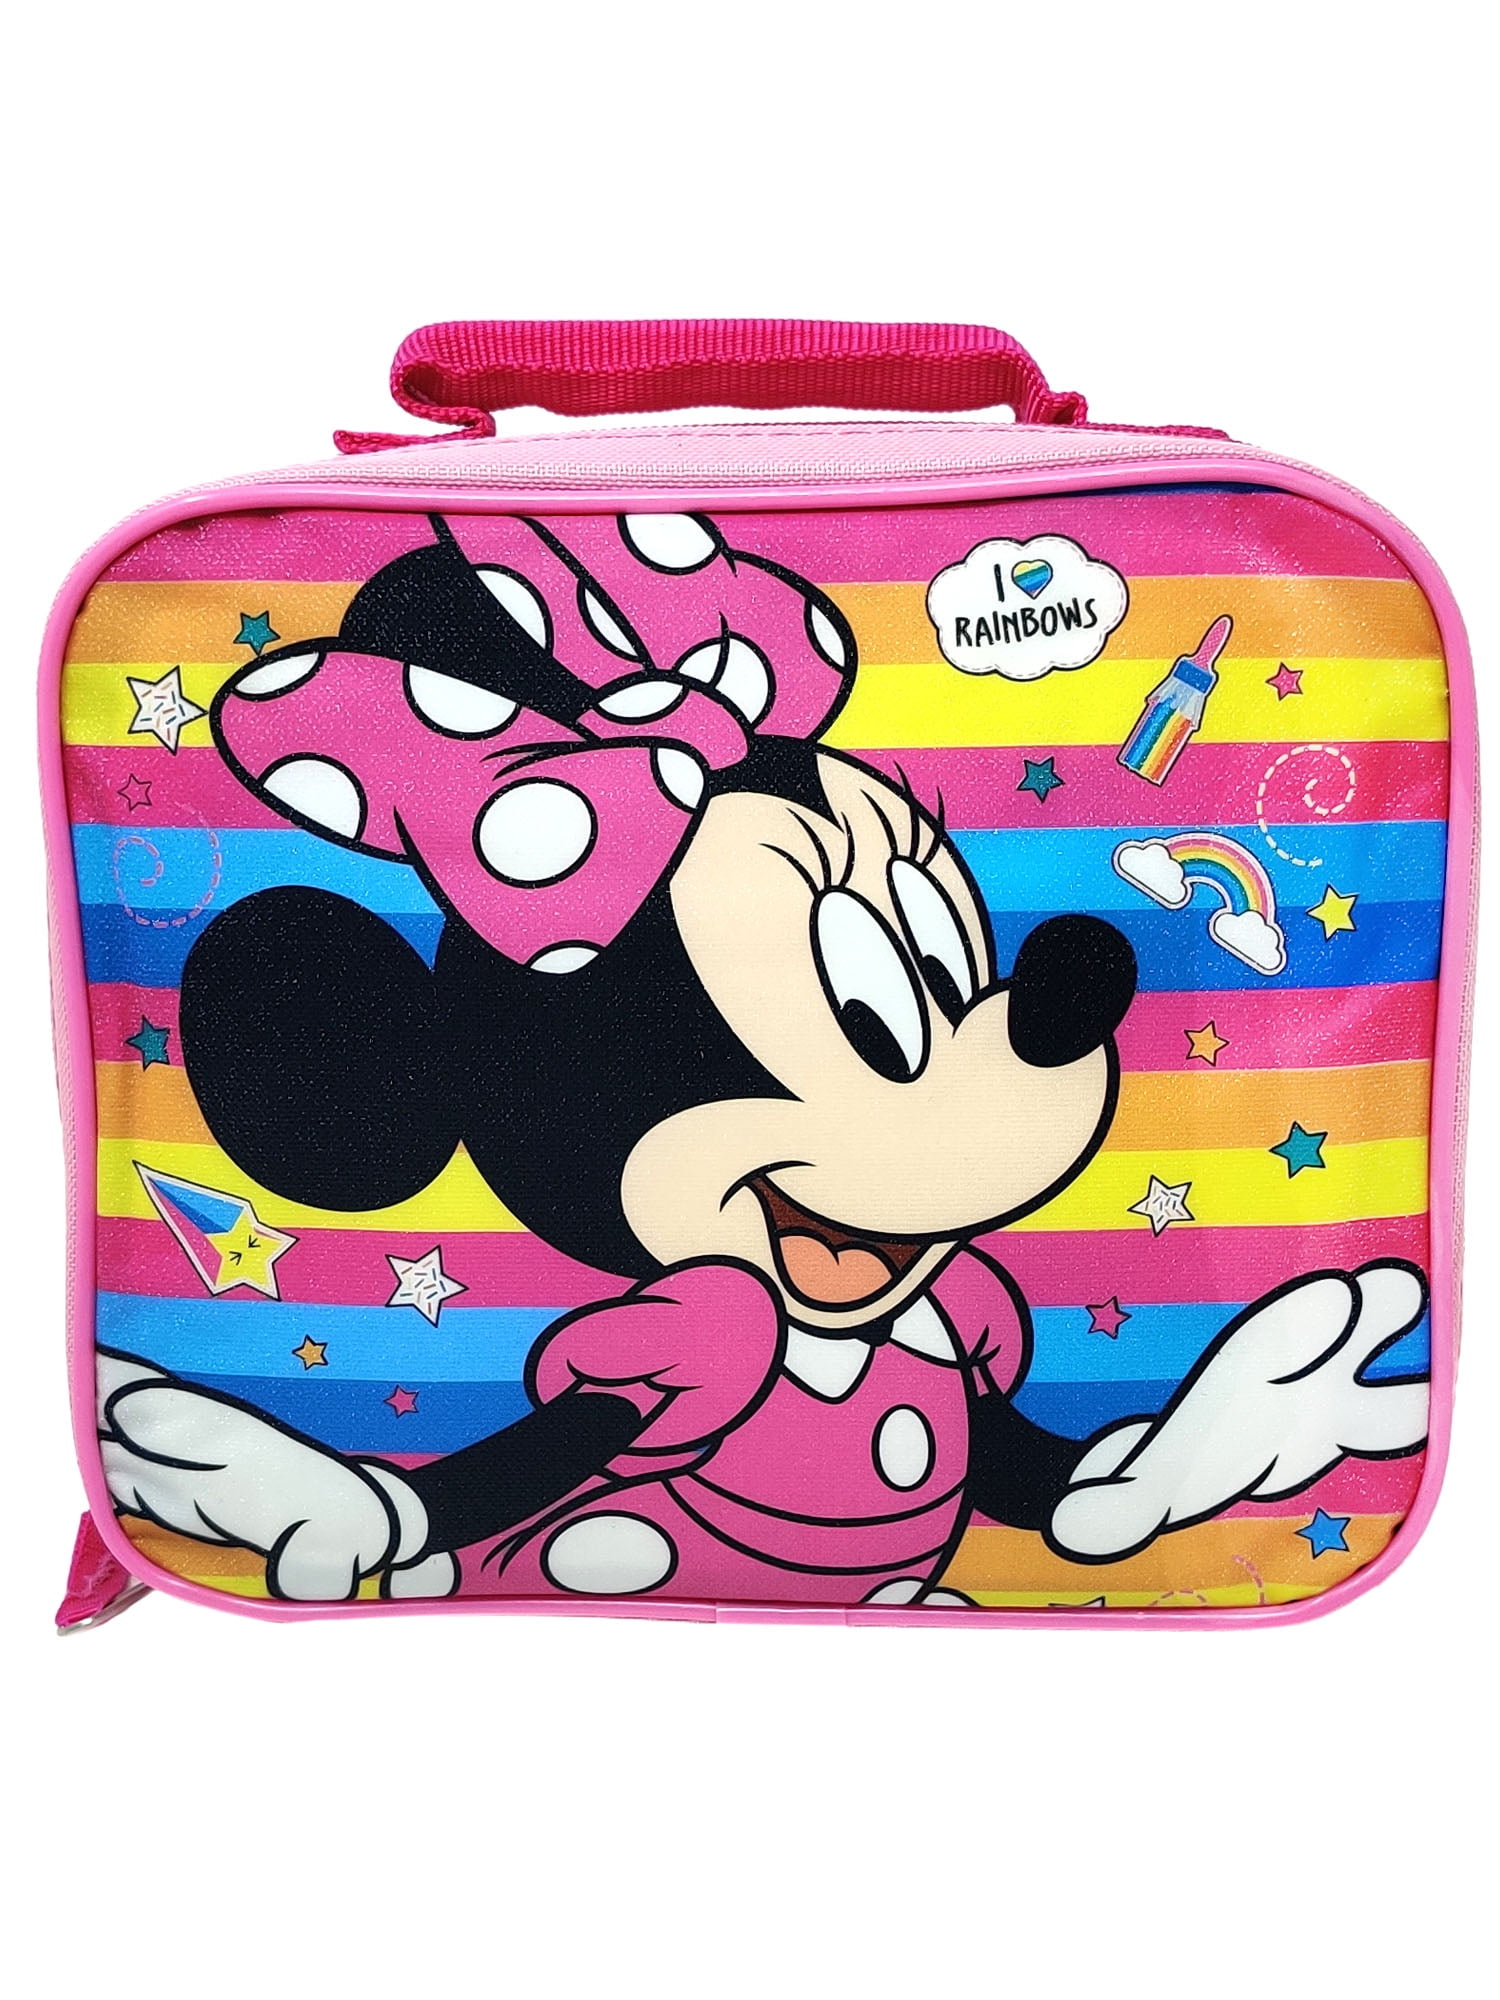 Disney Minnie Mouse Sandwich Lunch Box/Bag with Carry Handle 